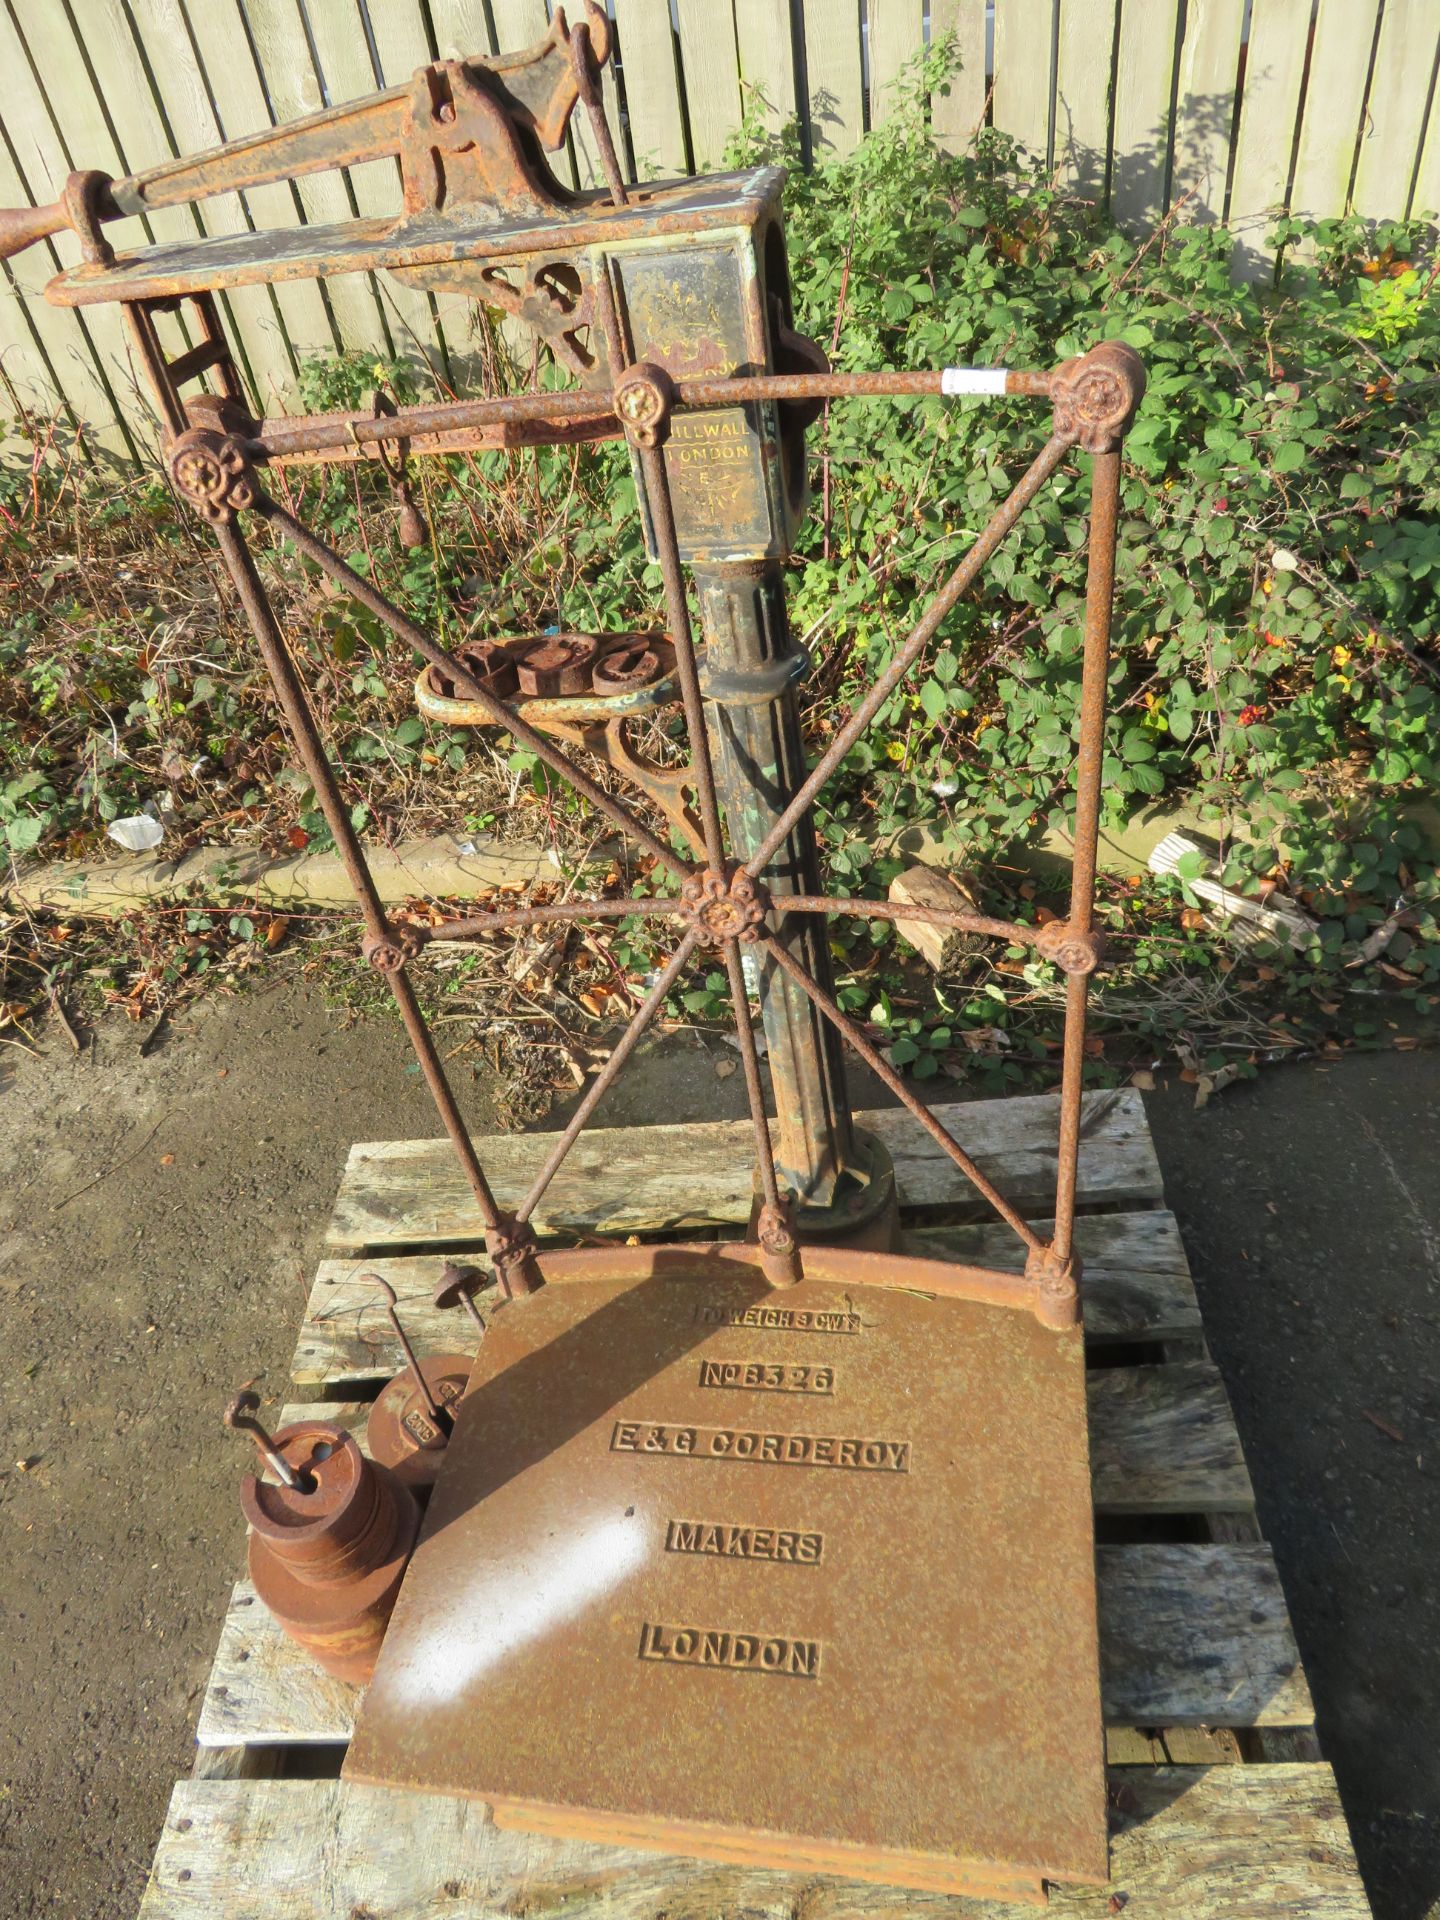 E & G Corderoy Makers Millwall London - Platform Weigh Scales - 9cwt - Image 3 of 10